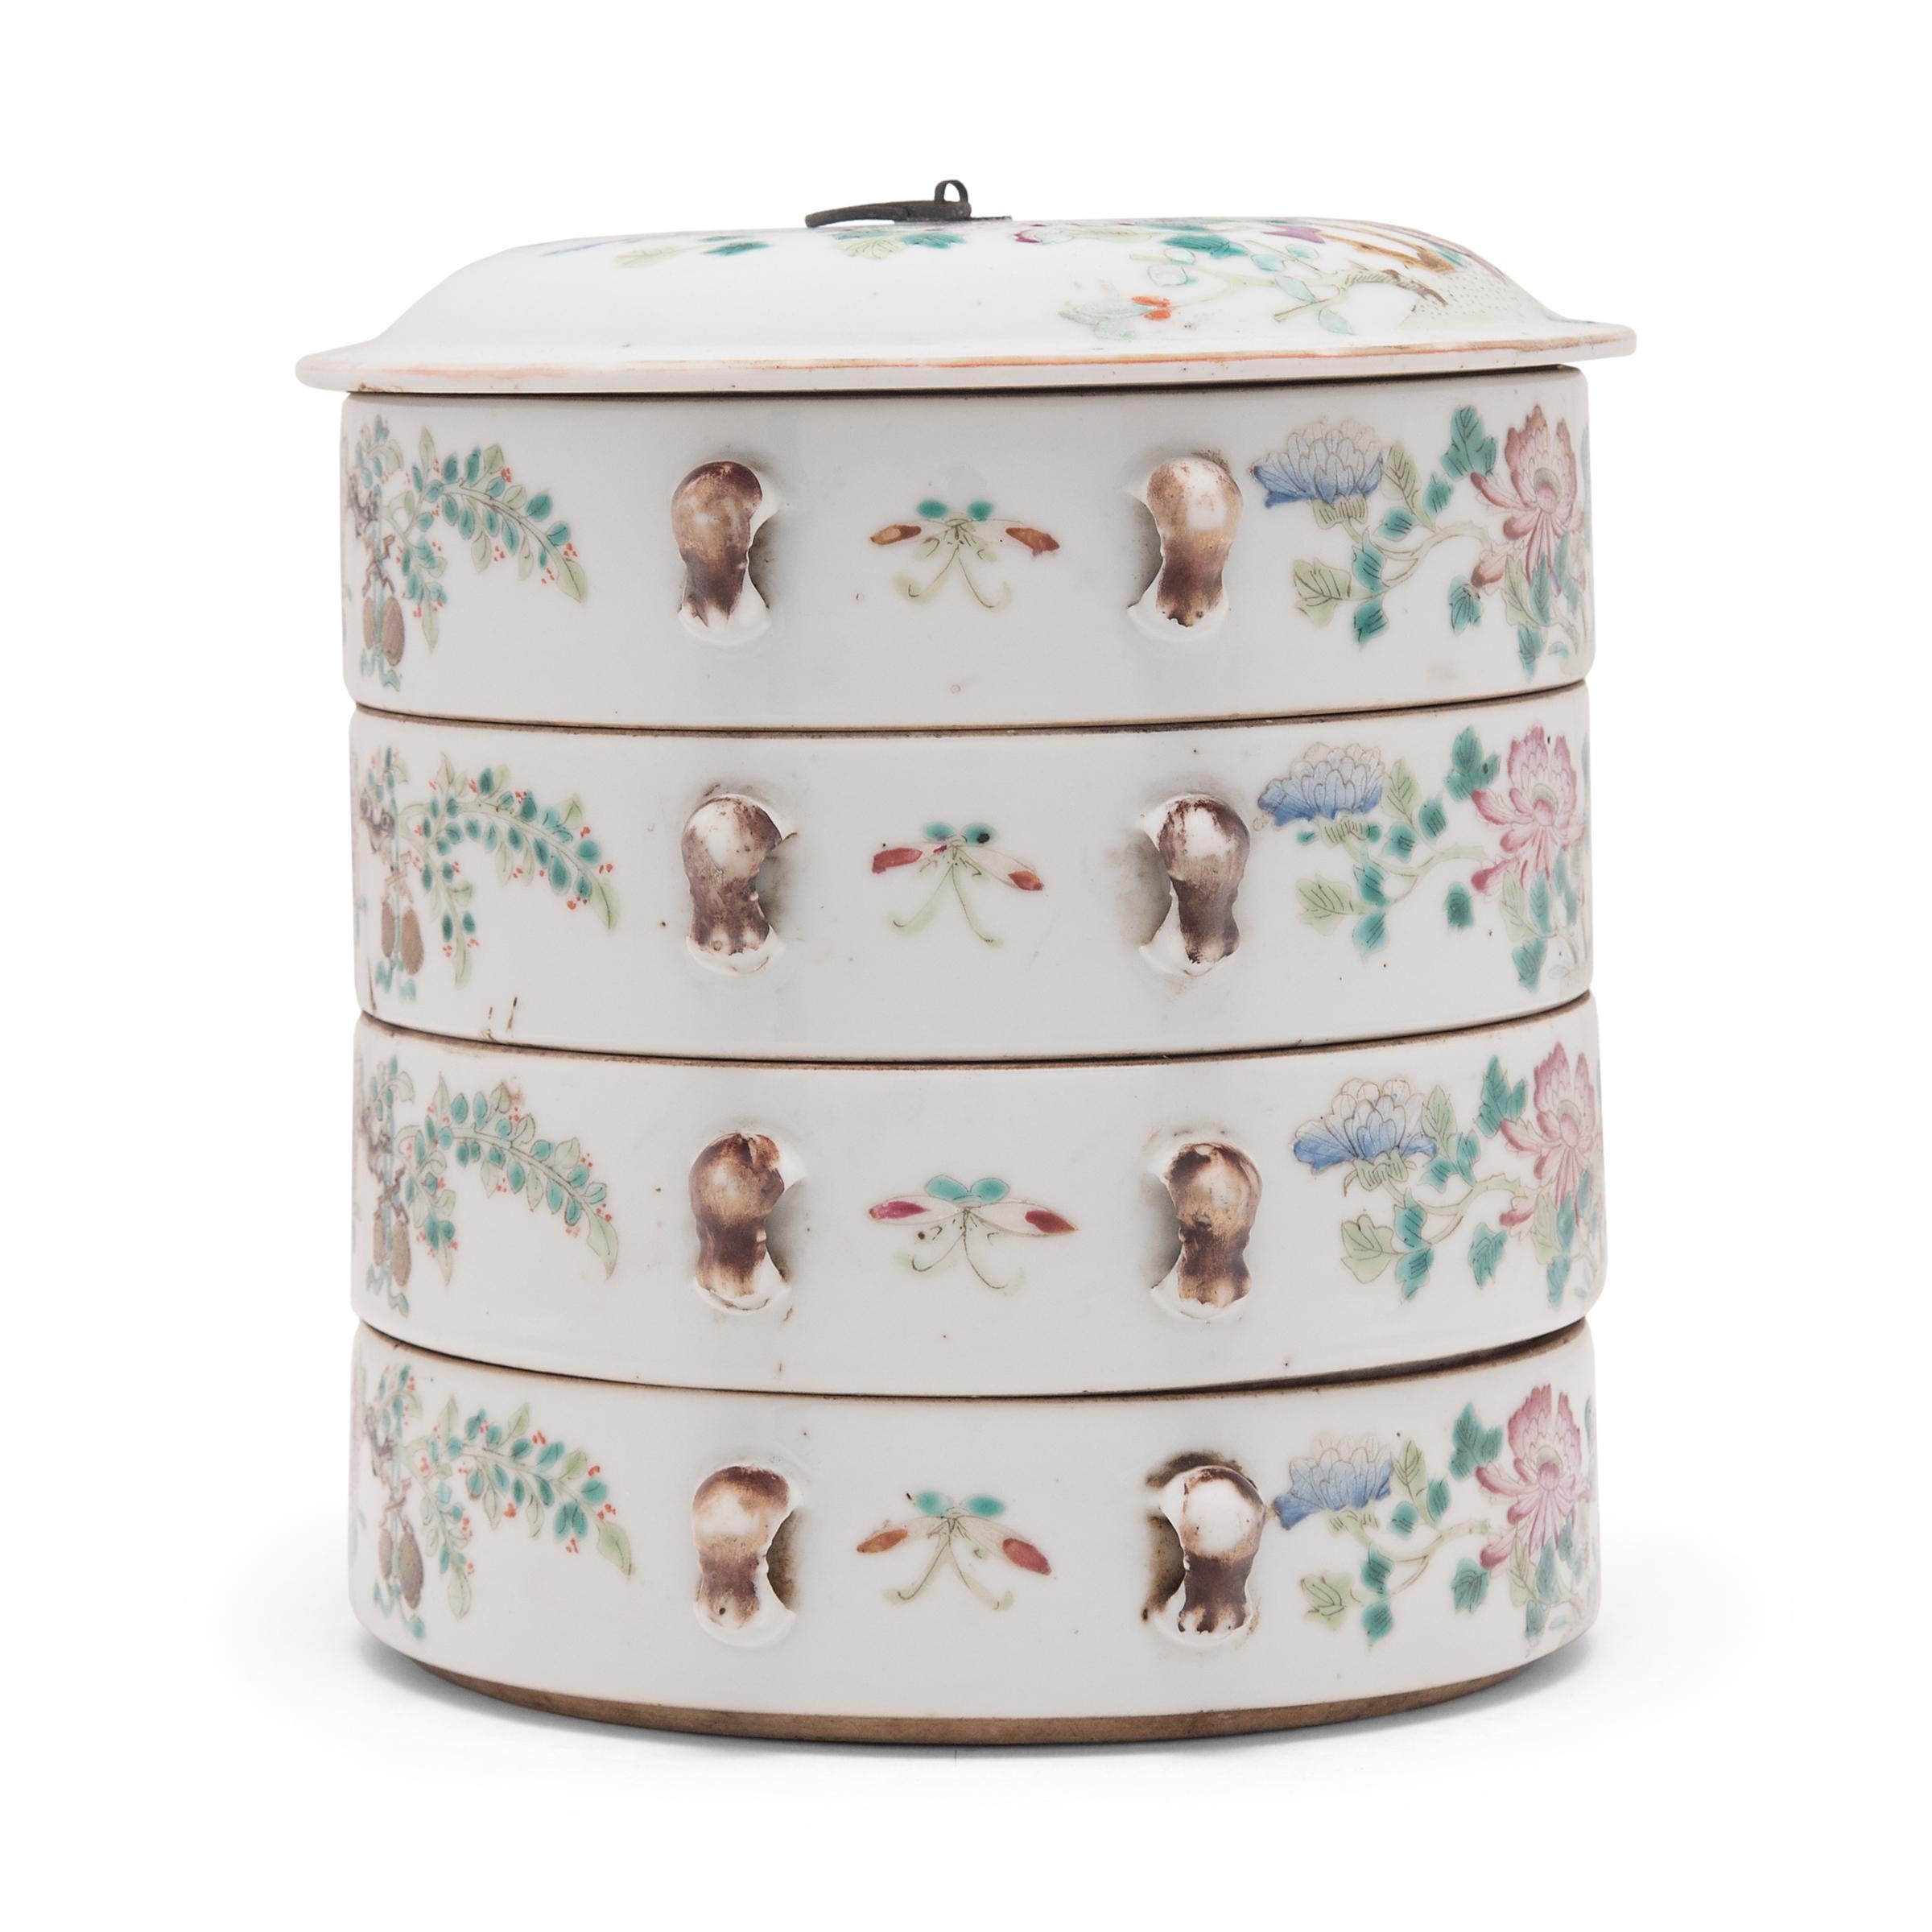 This early 20th-century porcelain stacking box would have been used in a woman's personal chambers to store jewelry and other precious small objects. The large round box has four tiers, each decorated in the famille rose style, with pastel overglaze